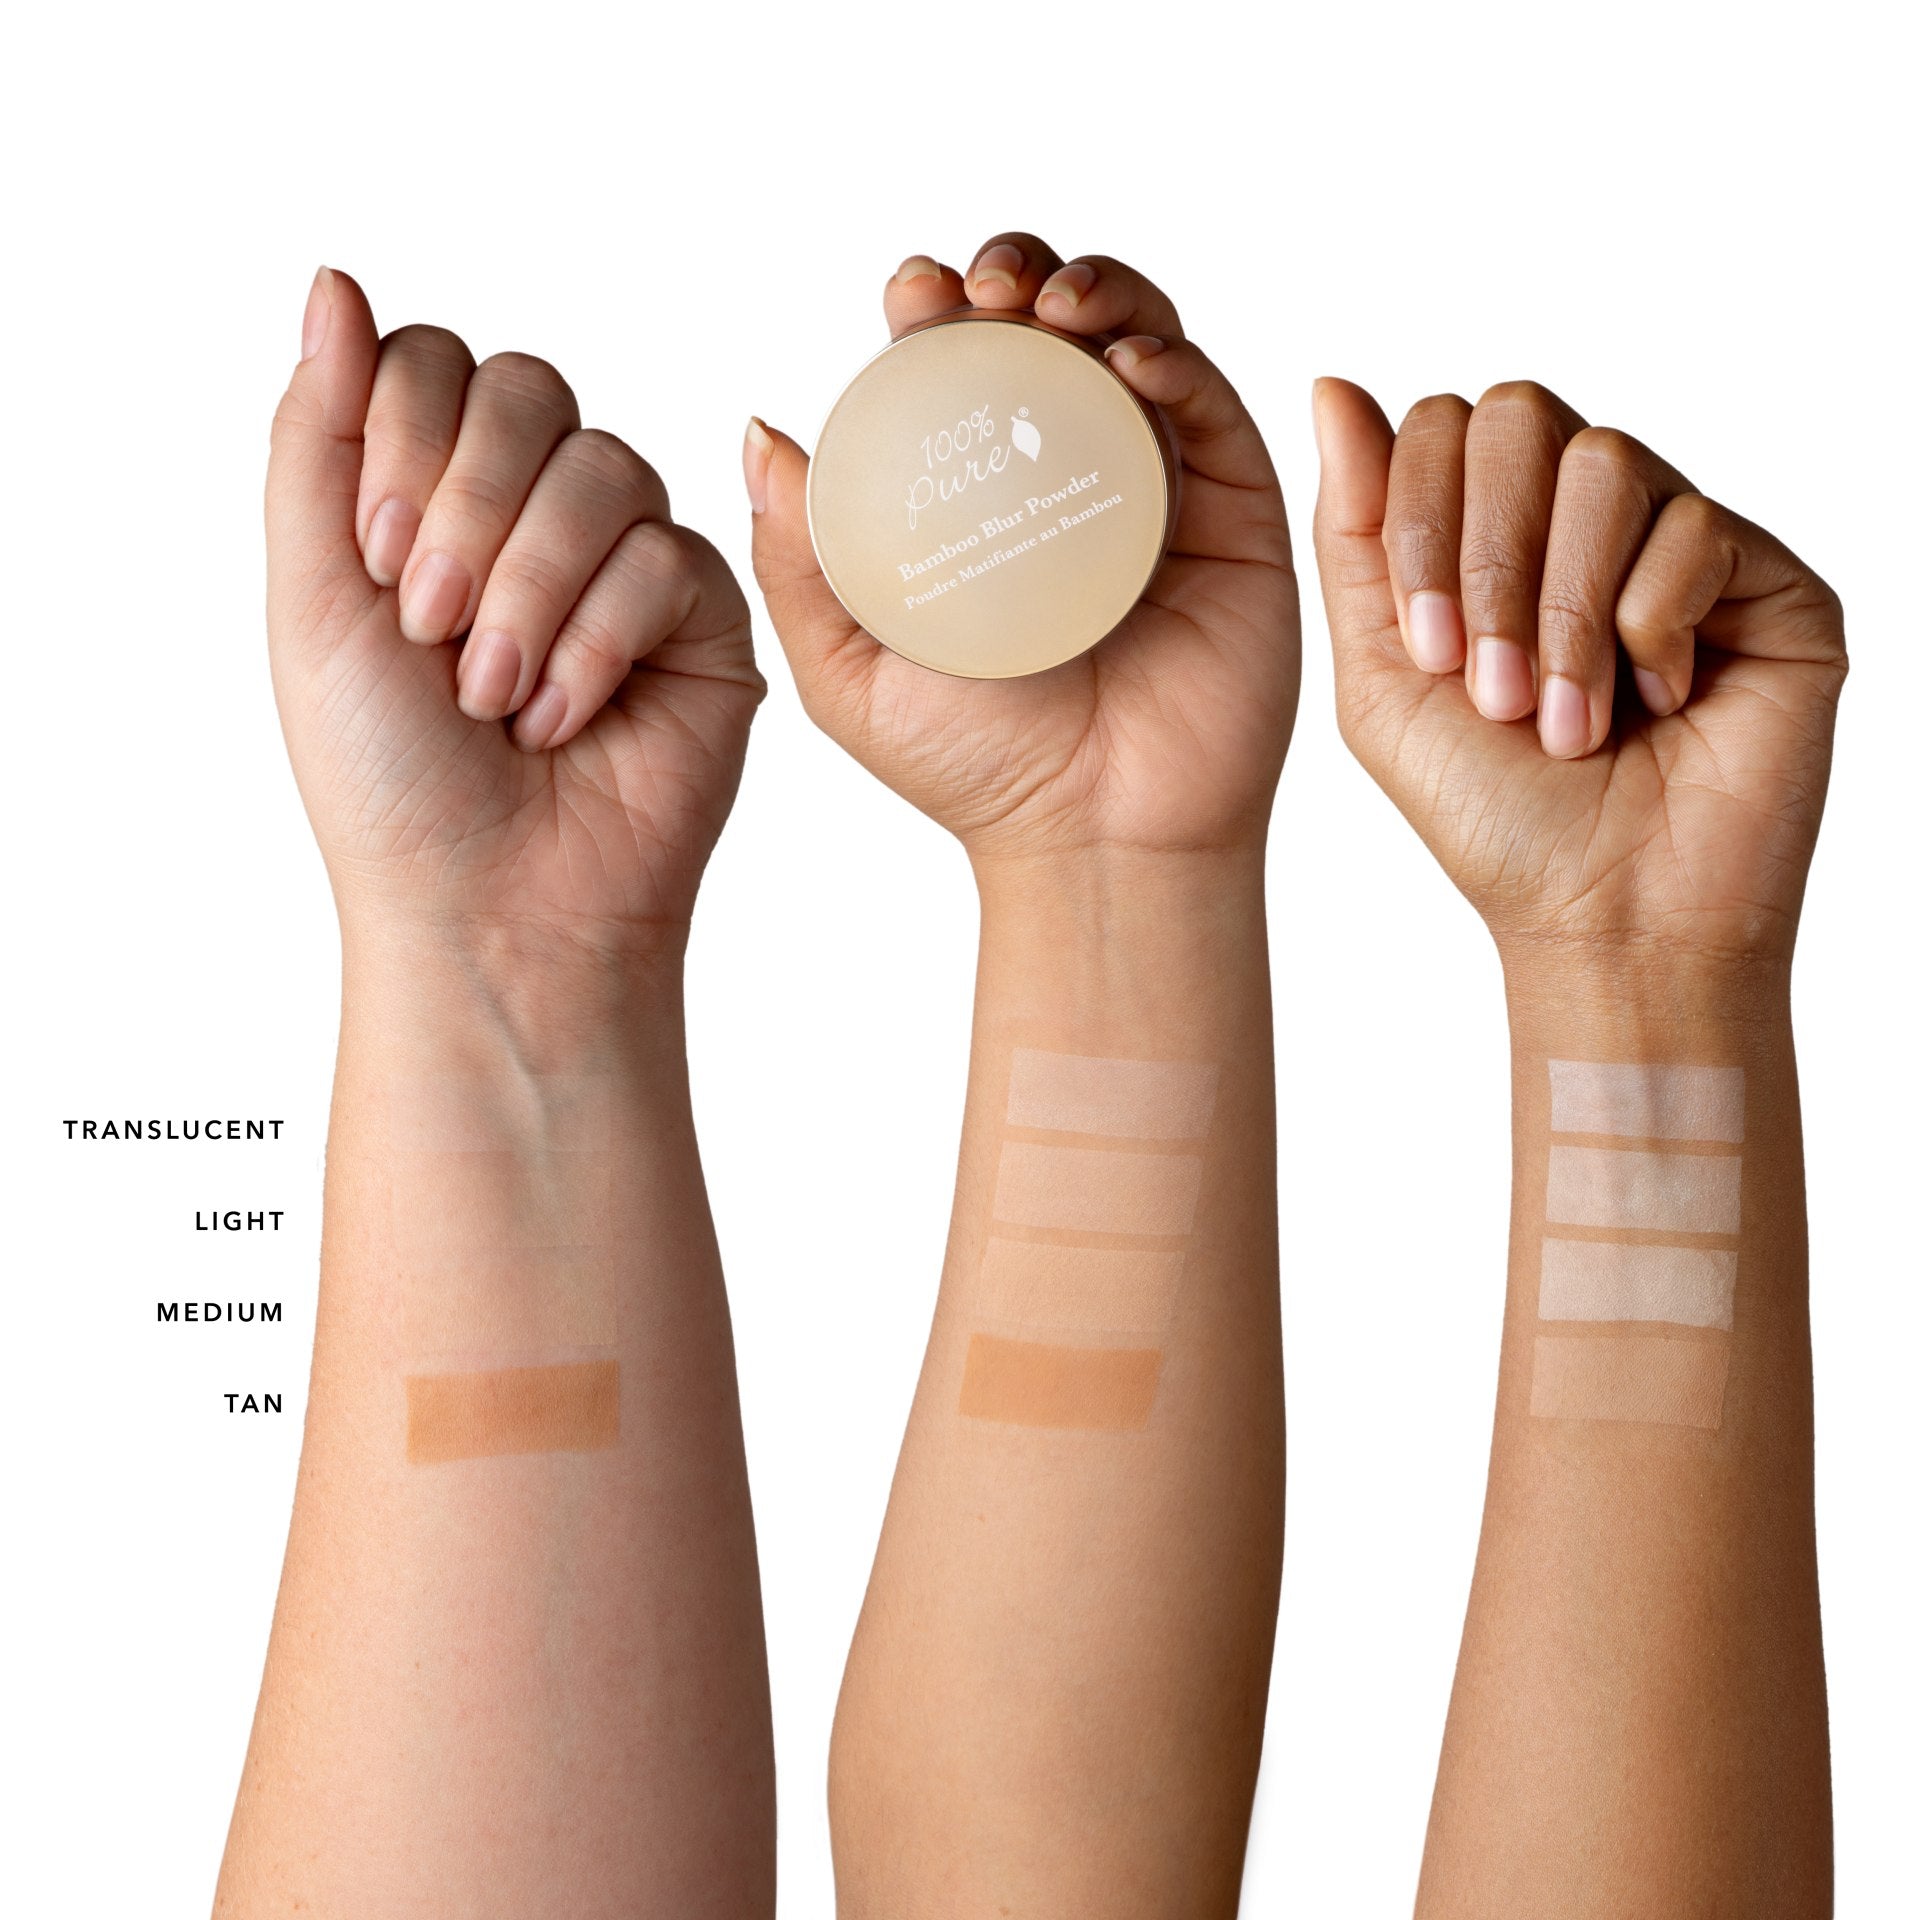 100% Pure Bamboo Blur Powder colour swatches on arm